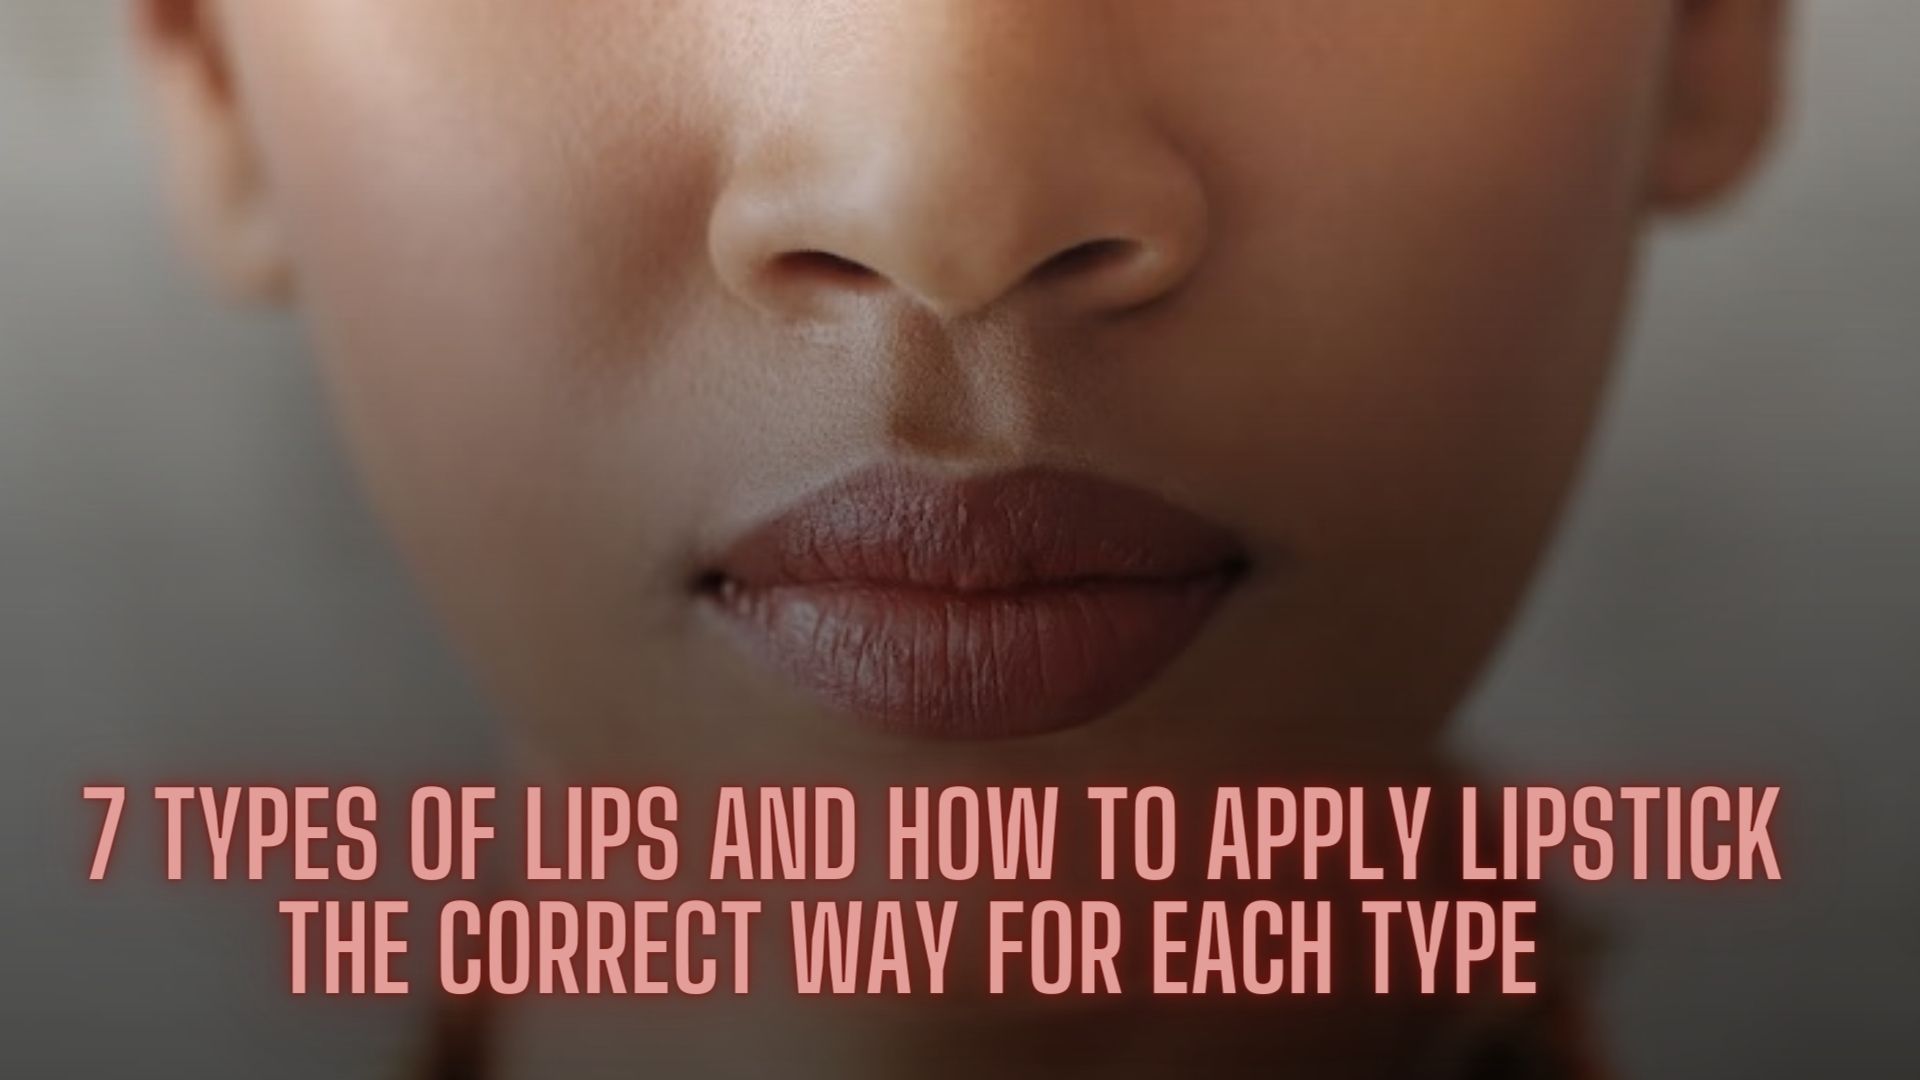 7 TYPES OF LIPS AND HOW TO APPLY LIPSTICK THE CORRECT WAY FOR EACH TYPE